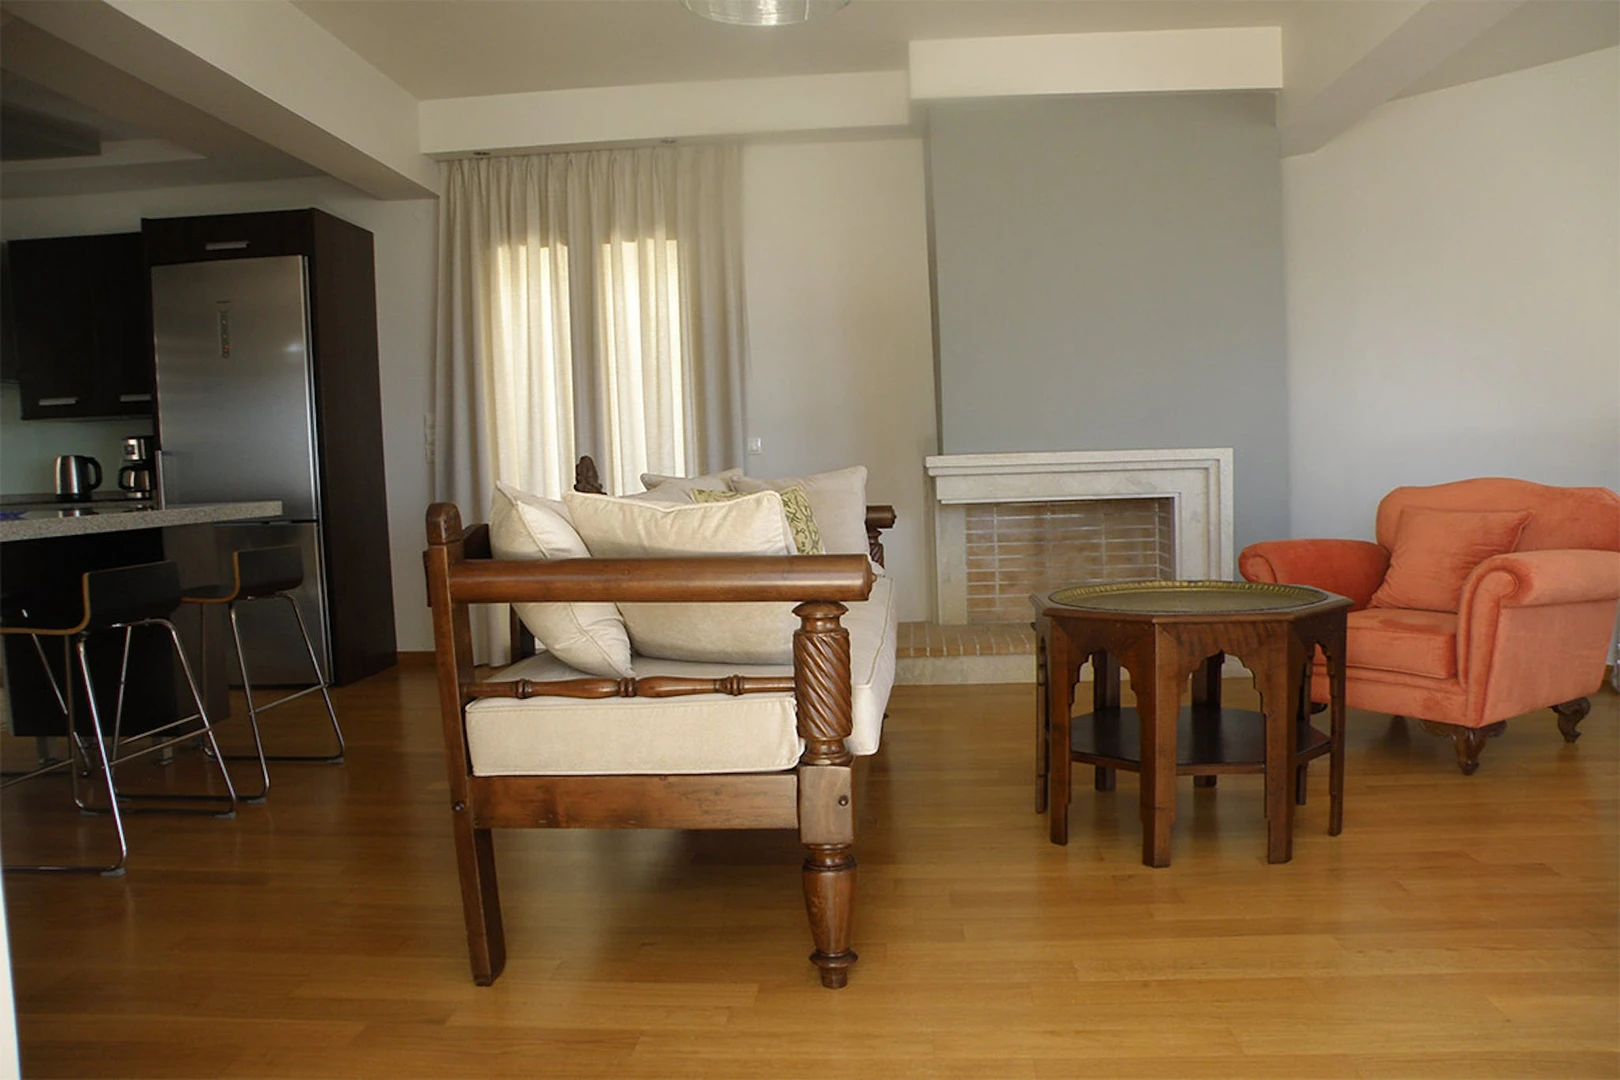 Accommodation with 3 bedrooms in Heraklion